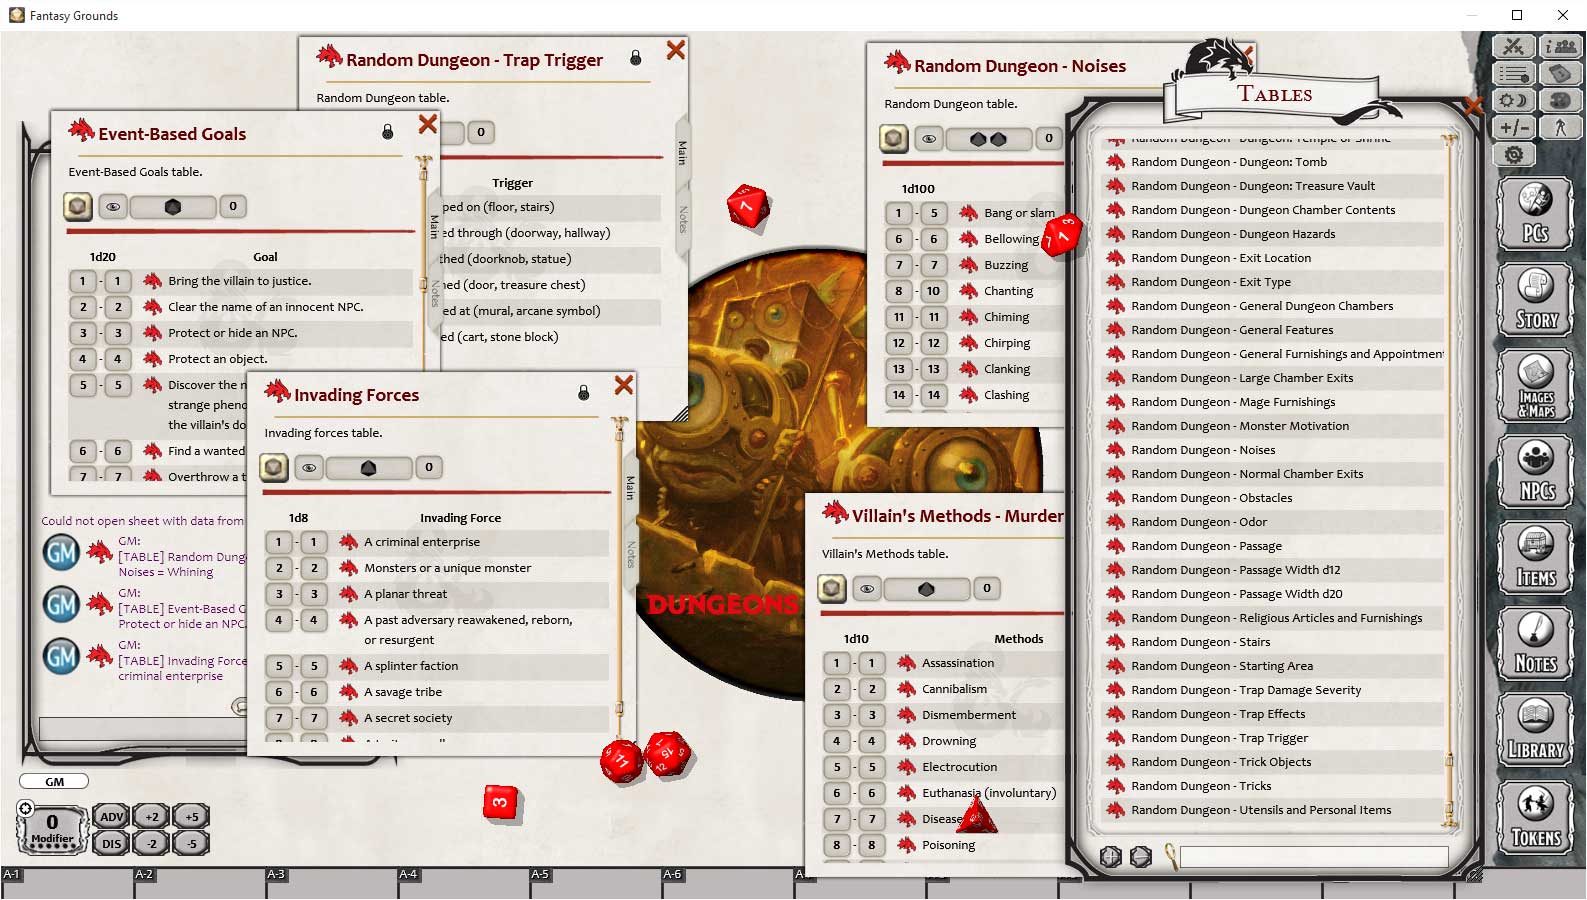 Does fantasy grounds support optional rules from the dmg free